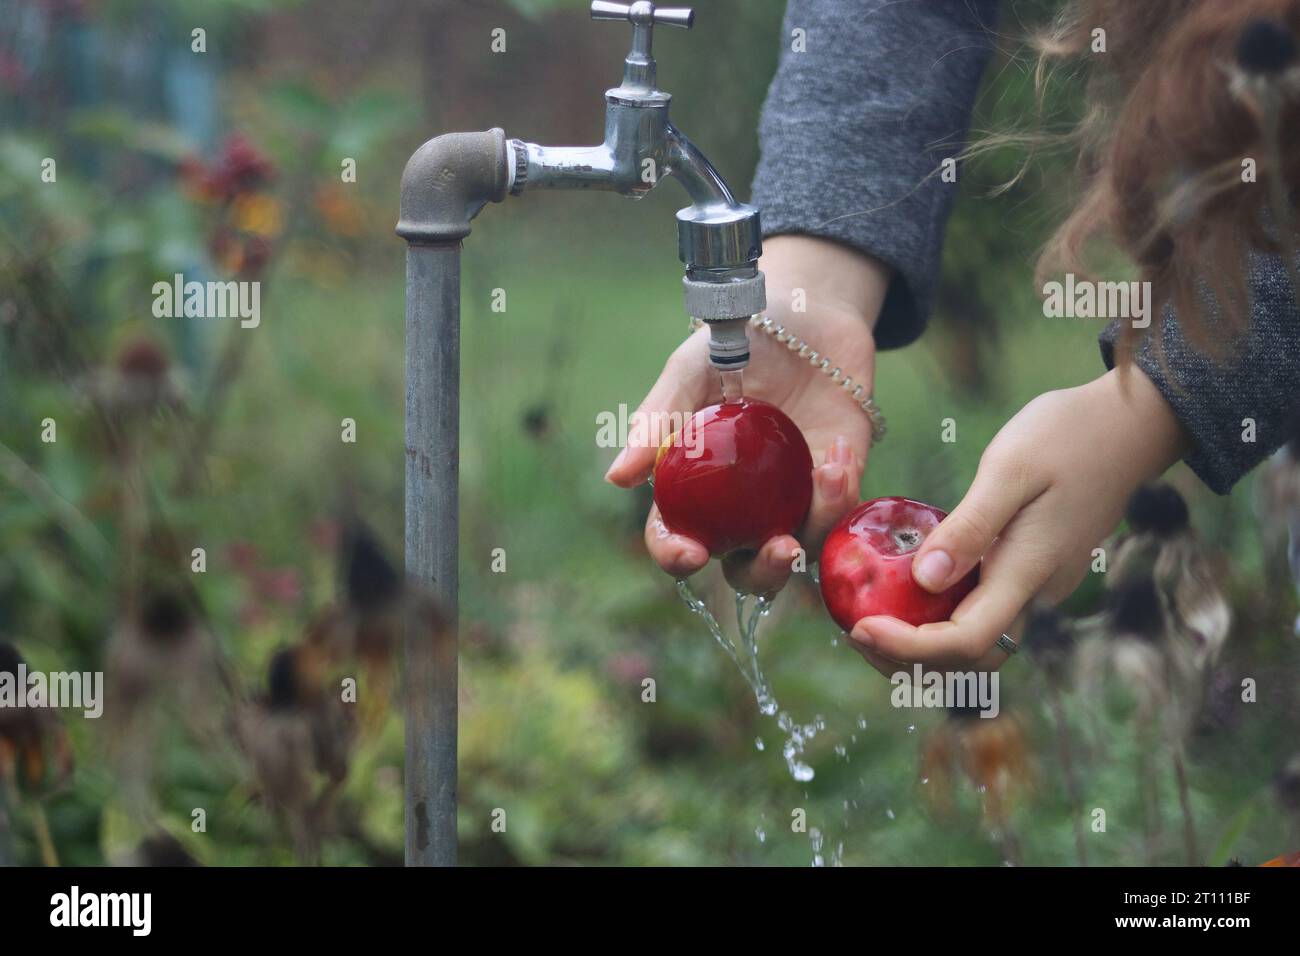 Hands of young woman washing two red apples under the water jet flowing from the tap in garden.Gardening. Garden flowers and plants on the background. Stock Photo